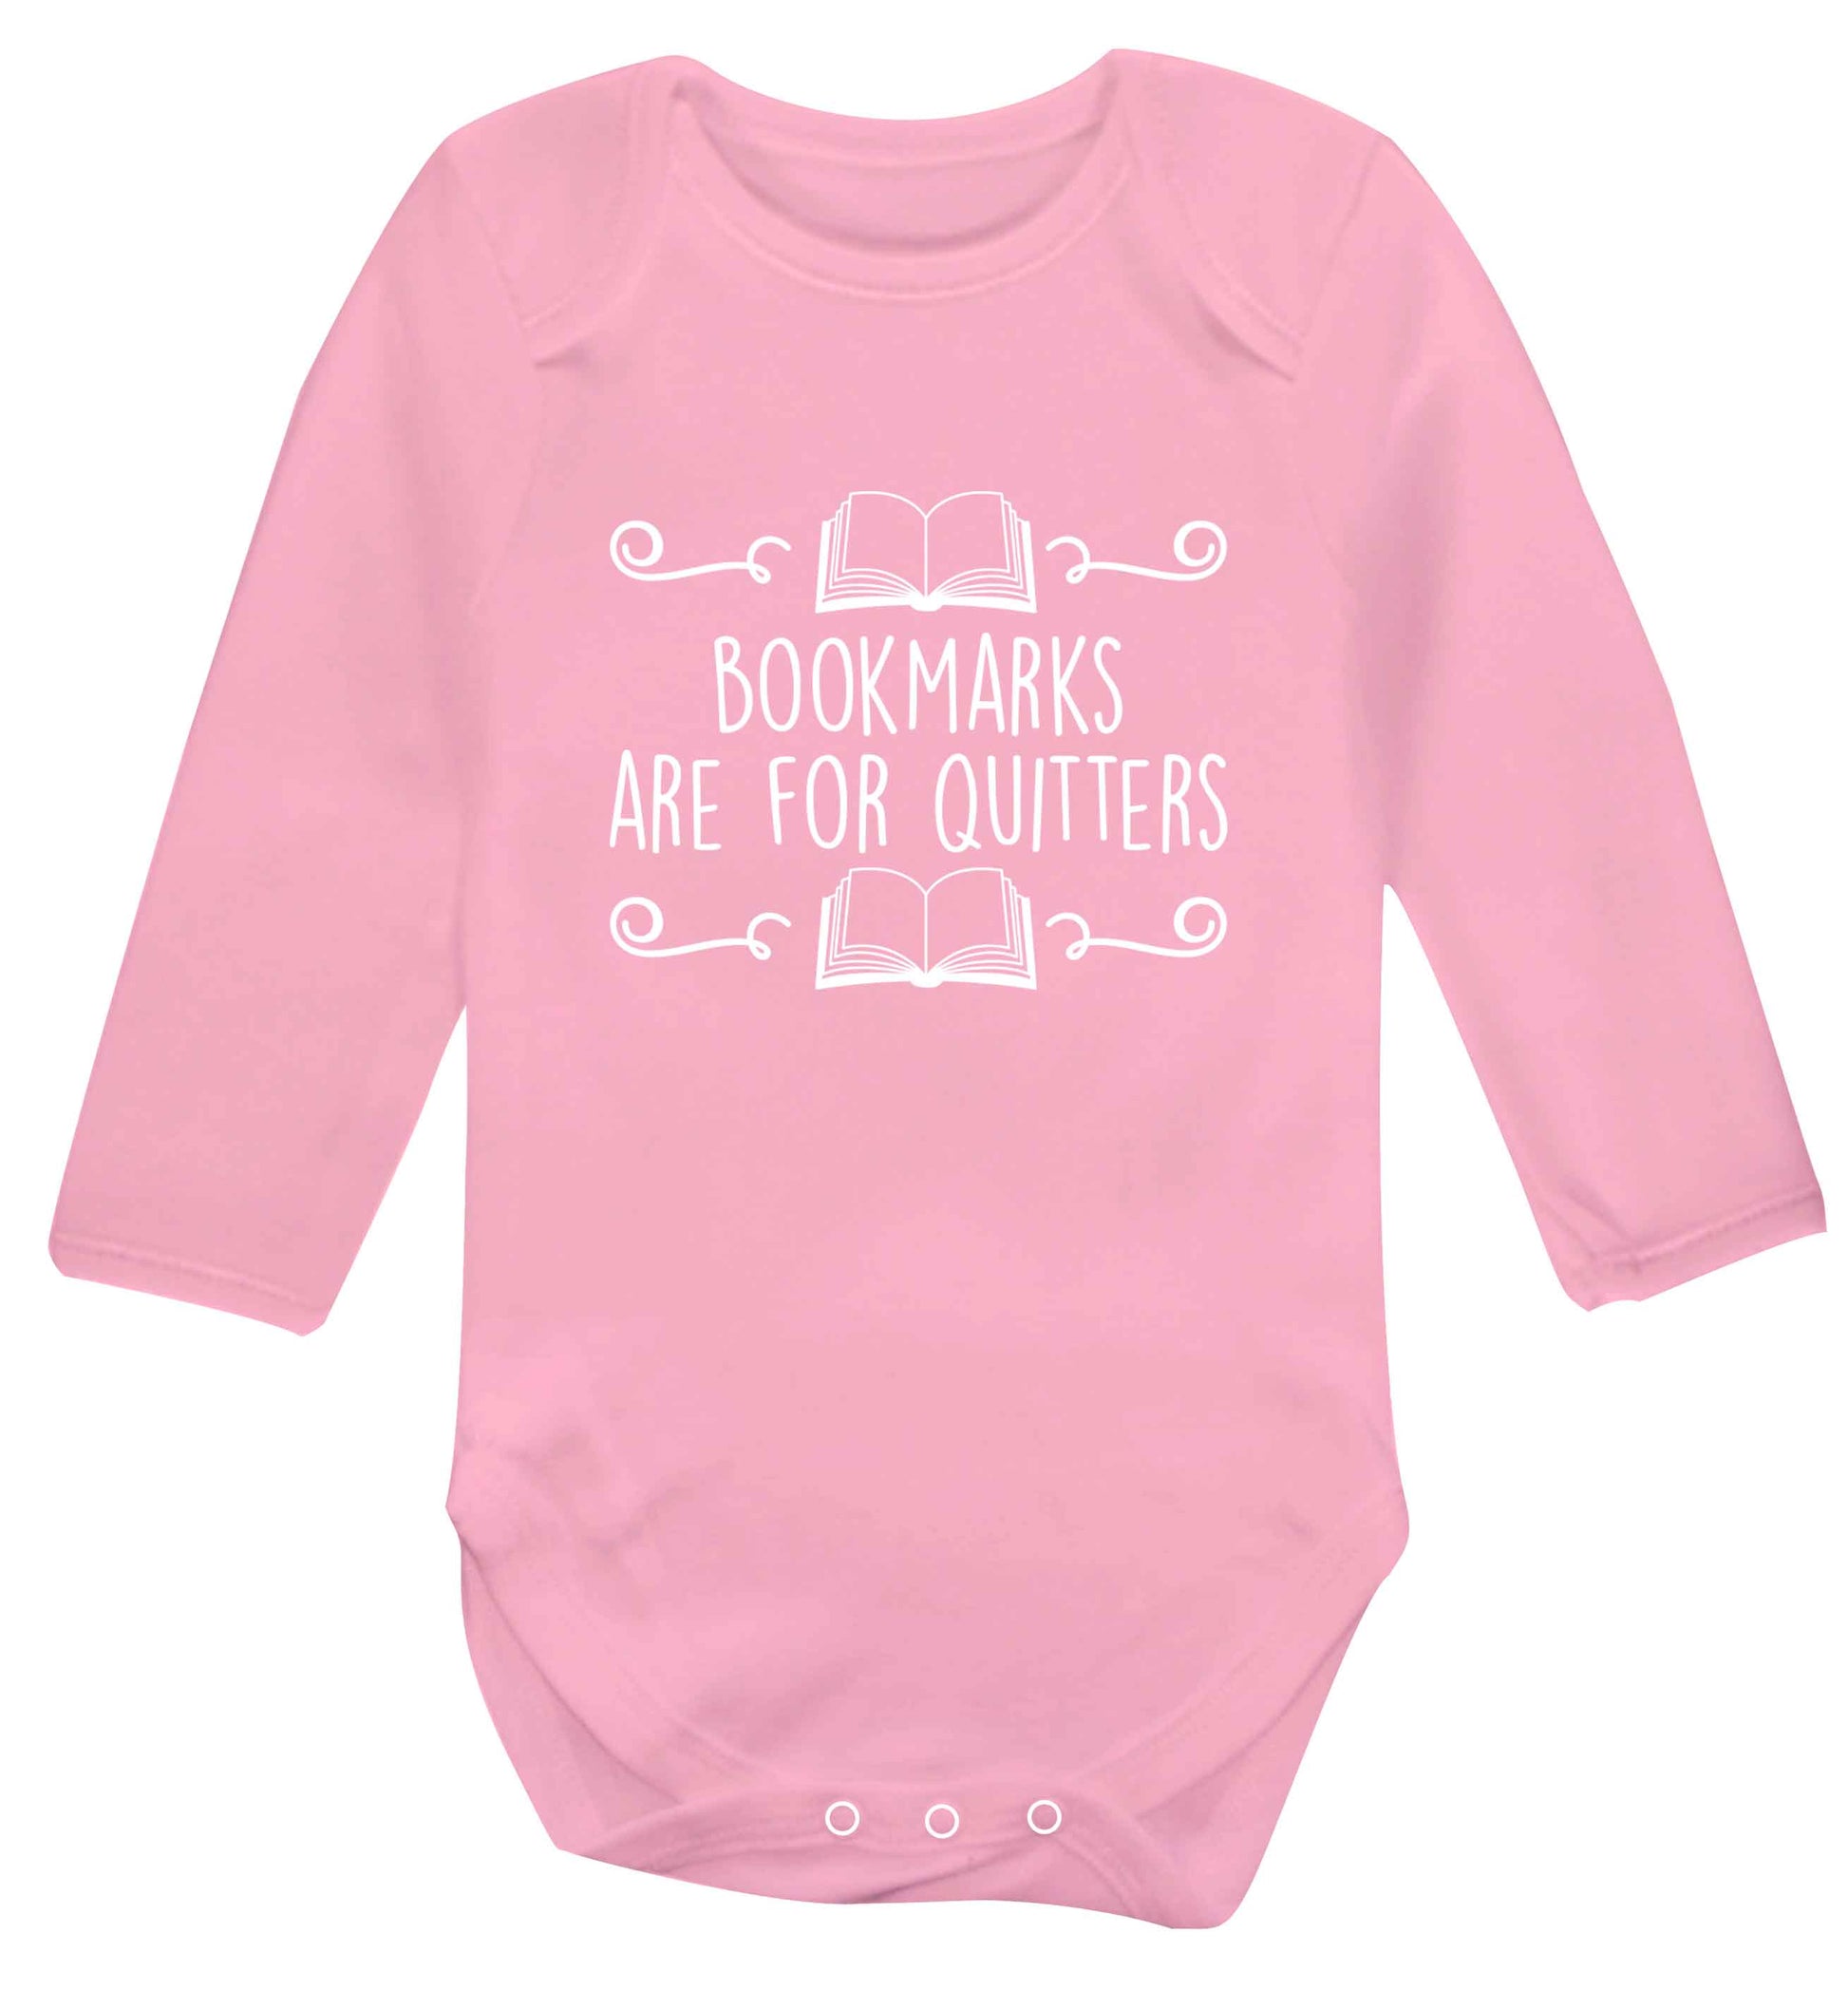 Bookmarks are for quitters baby vest long sleeved pale pink 6-12 months